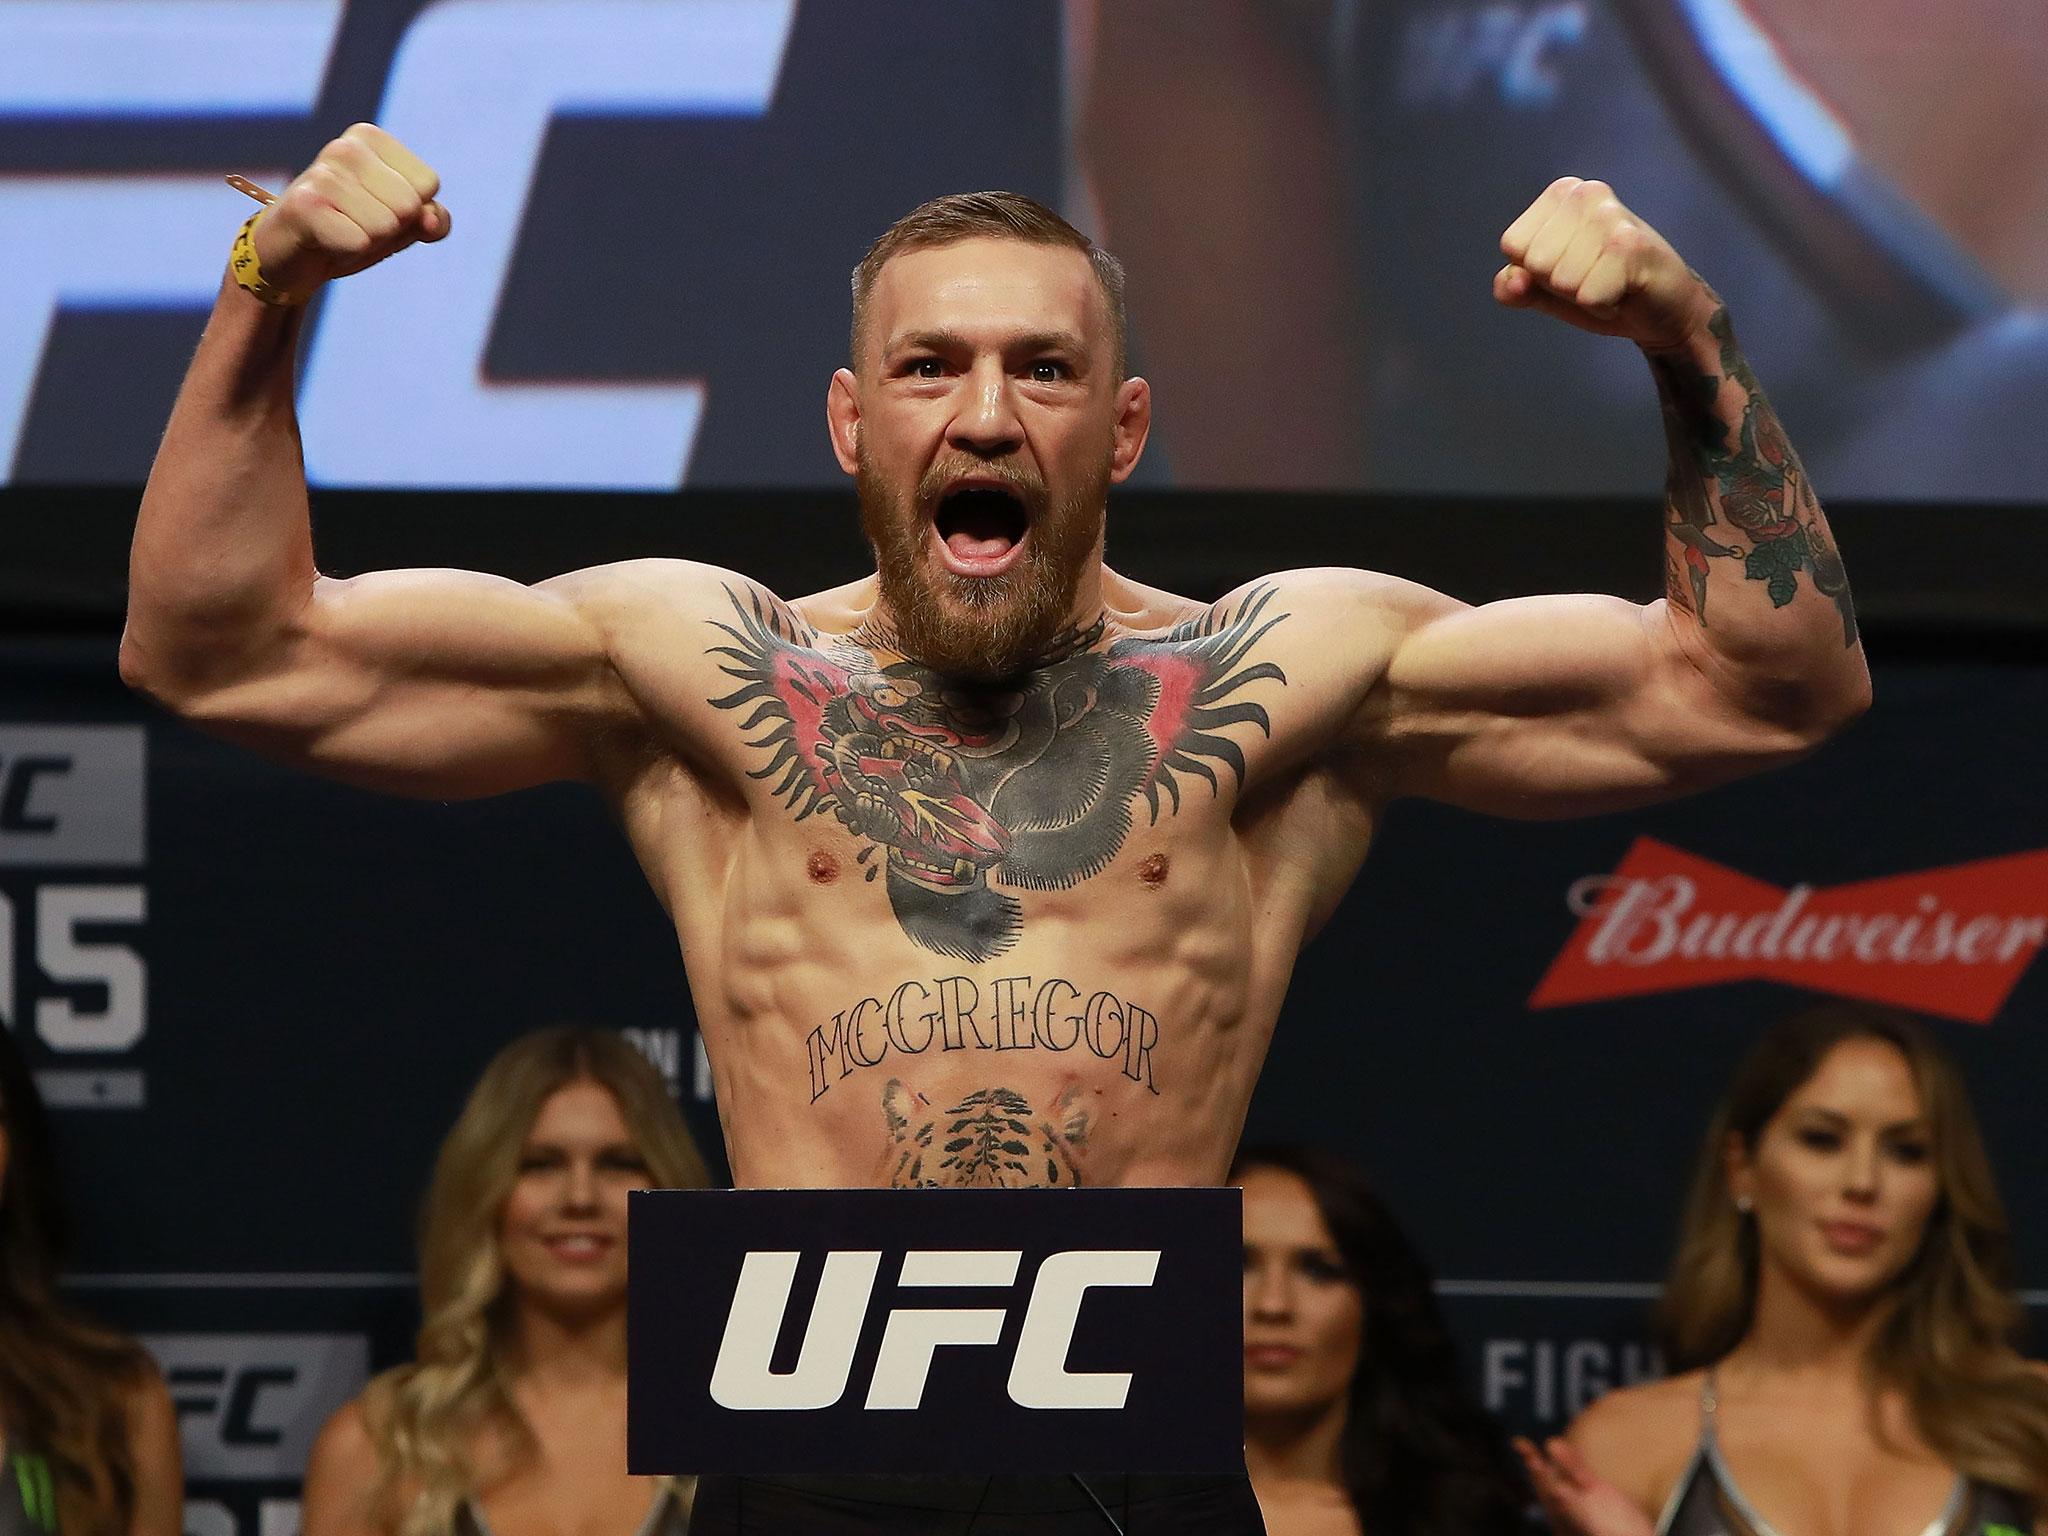 Conor McGregor has done much to build awareness of the UFC